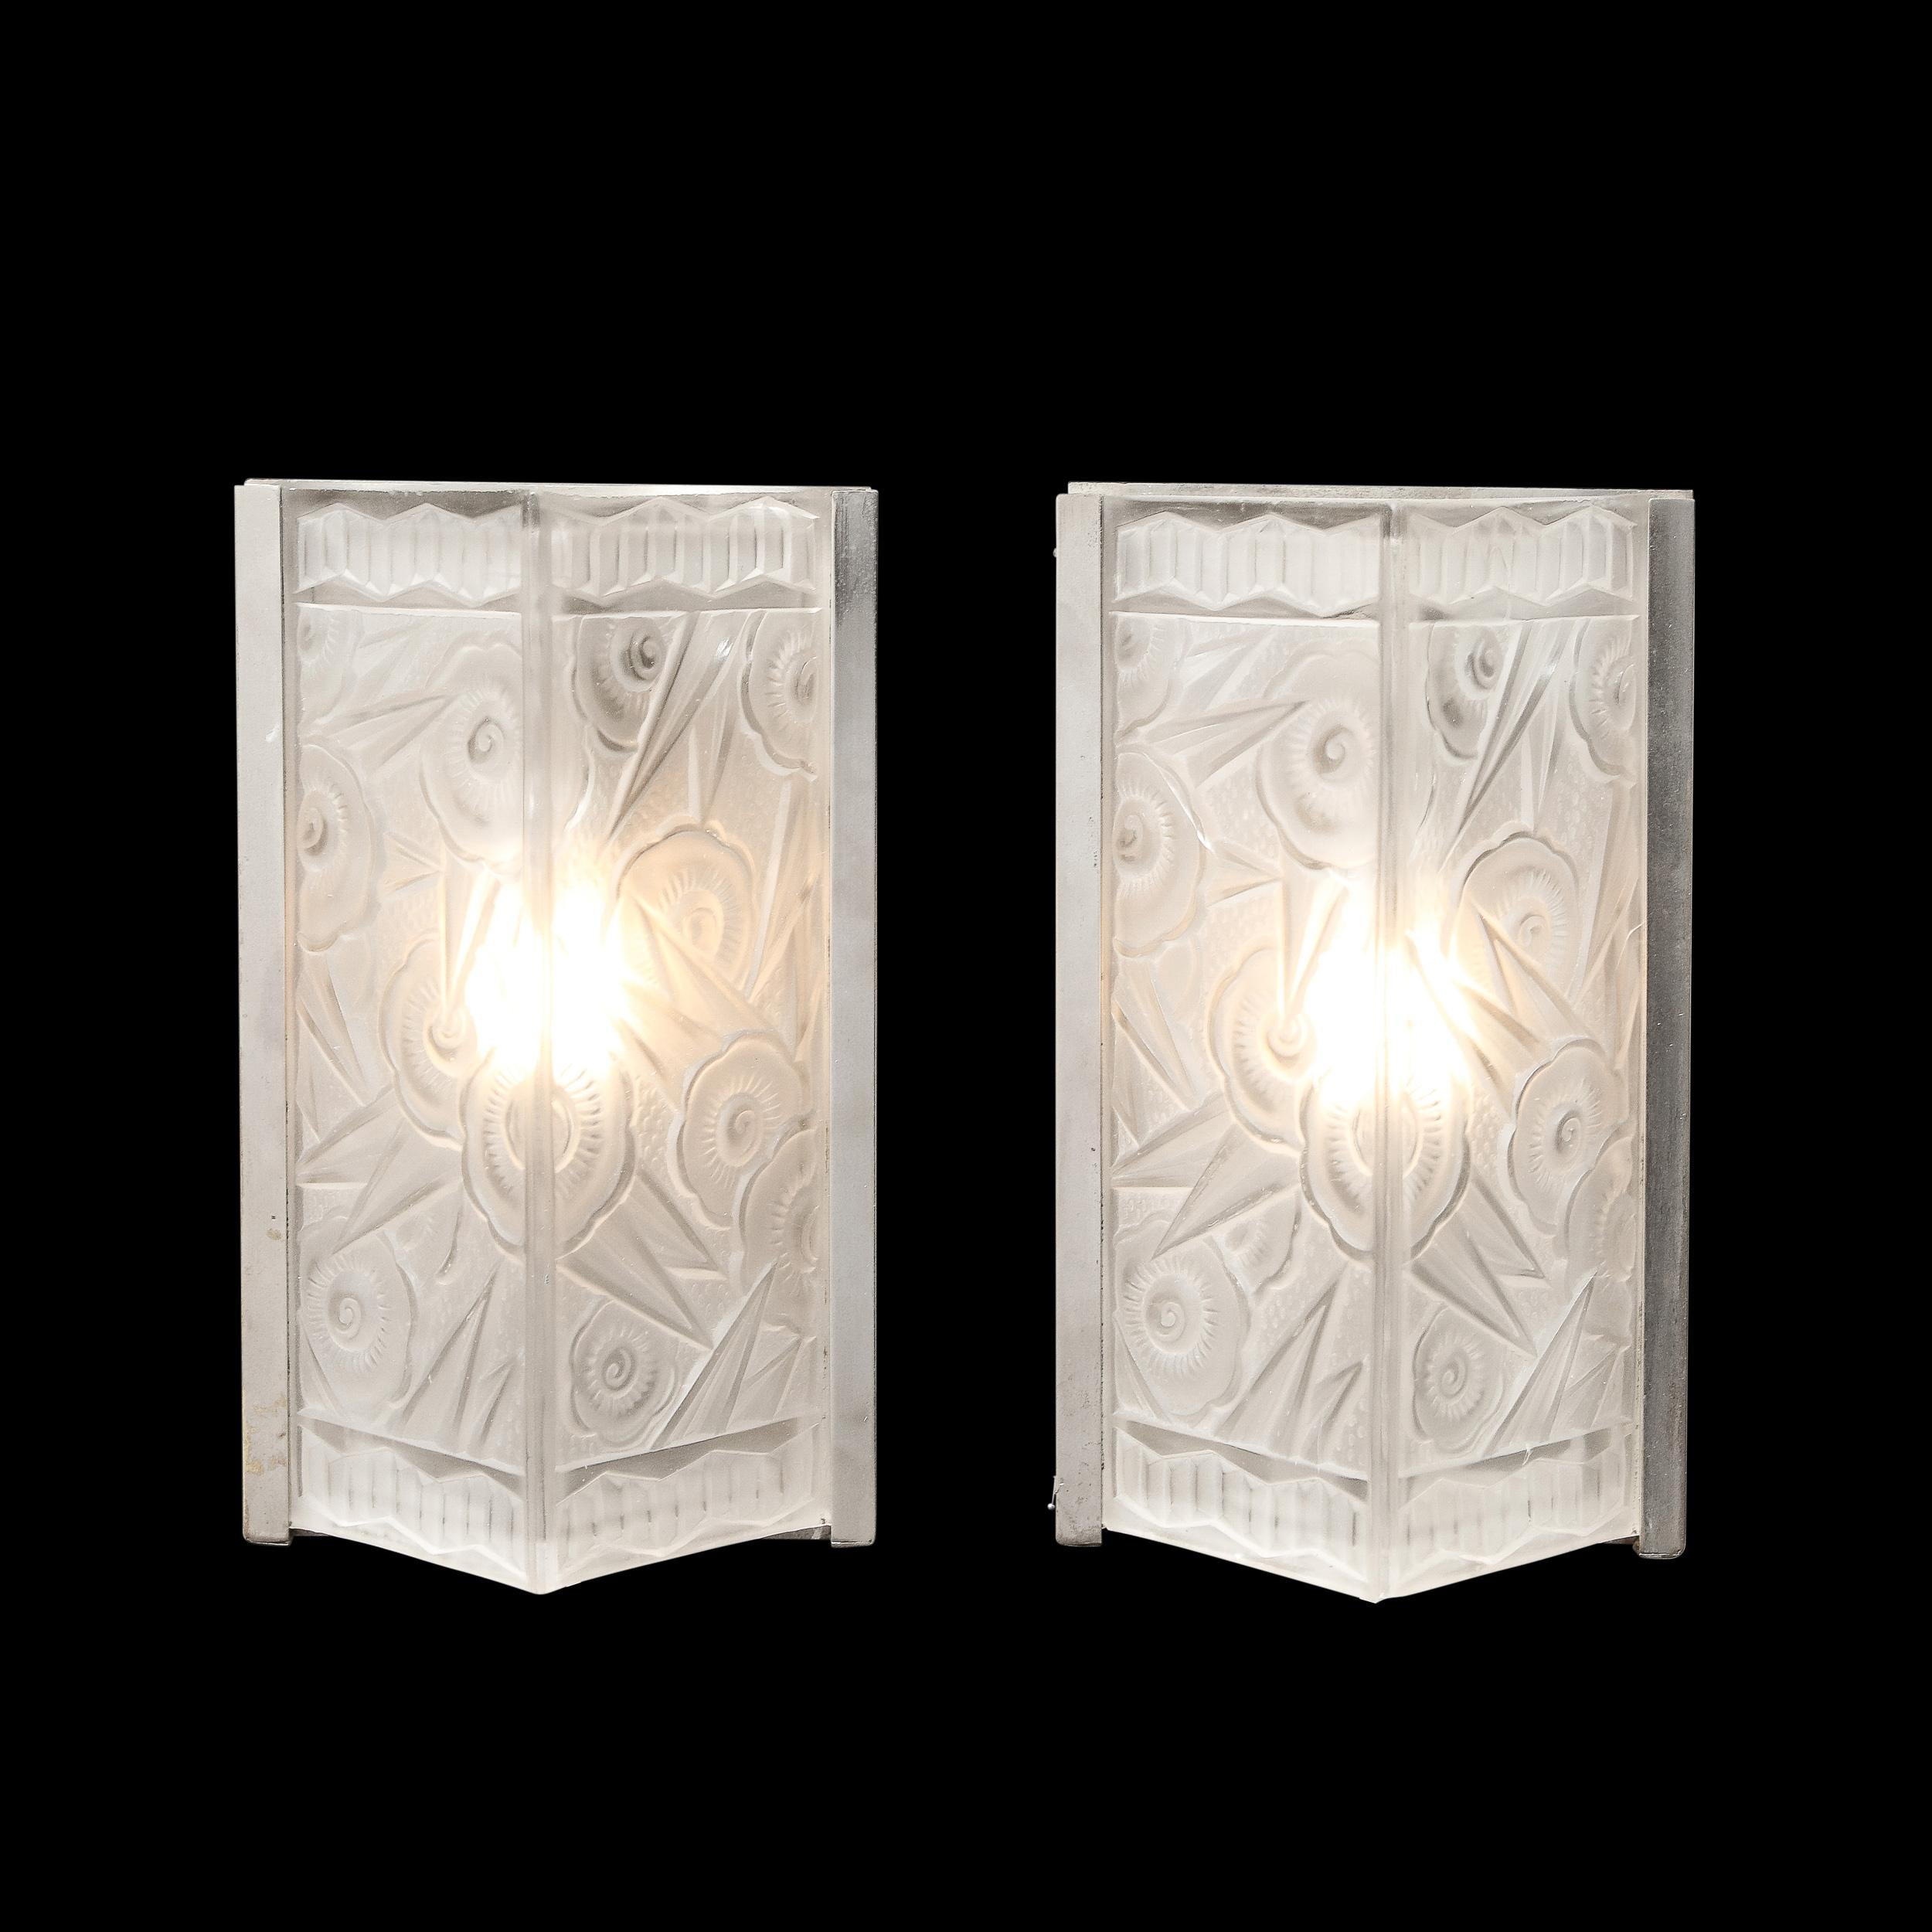 Mid-20th Century Pair of Art Deco Molded & Frosted Glass Sconces w/ Stylized Cubist Floral Motifs